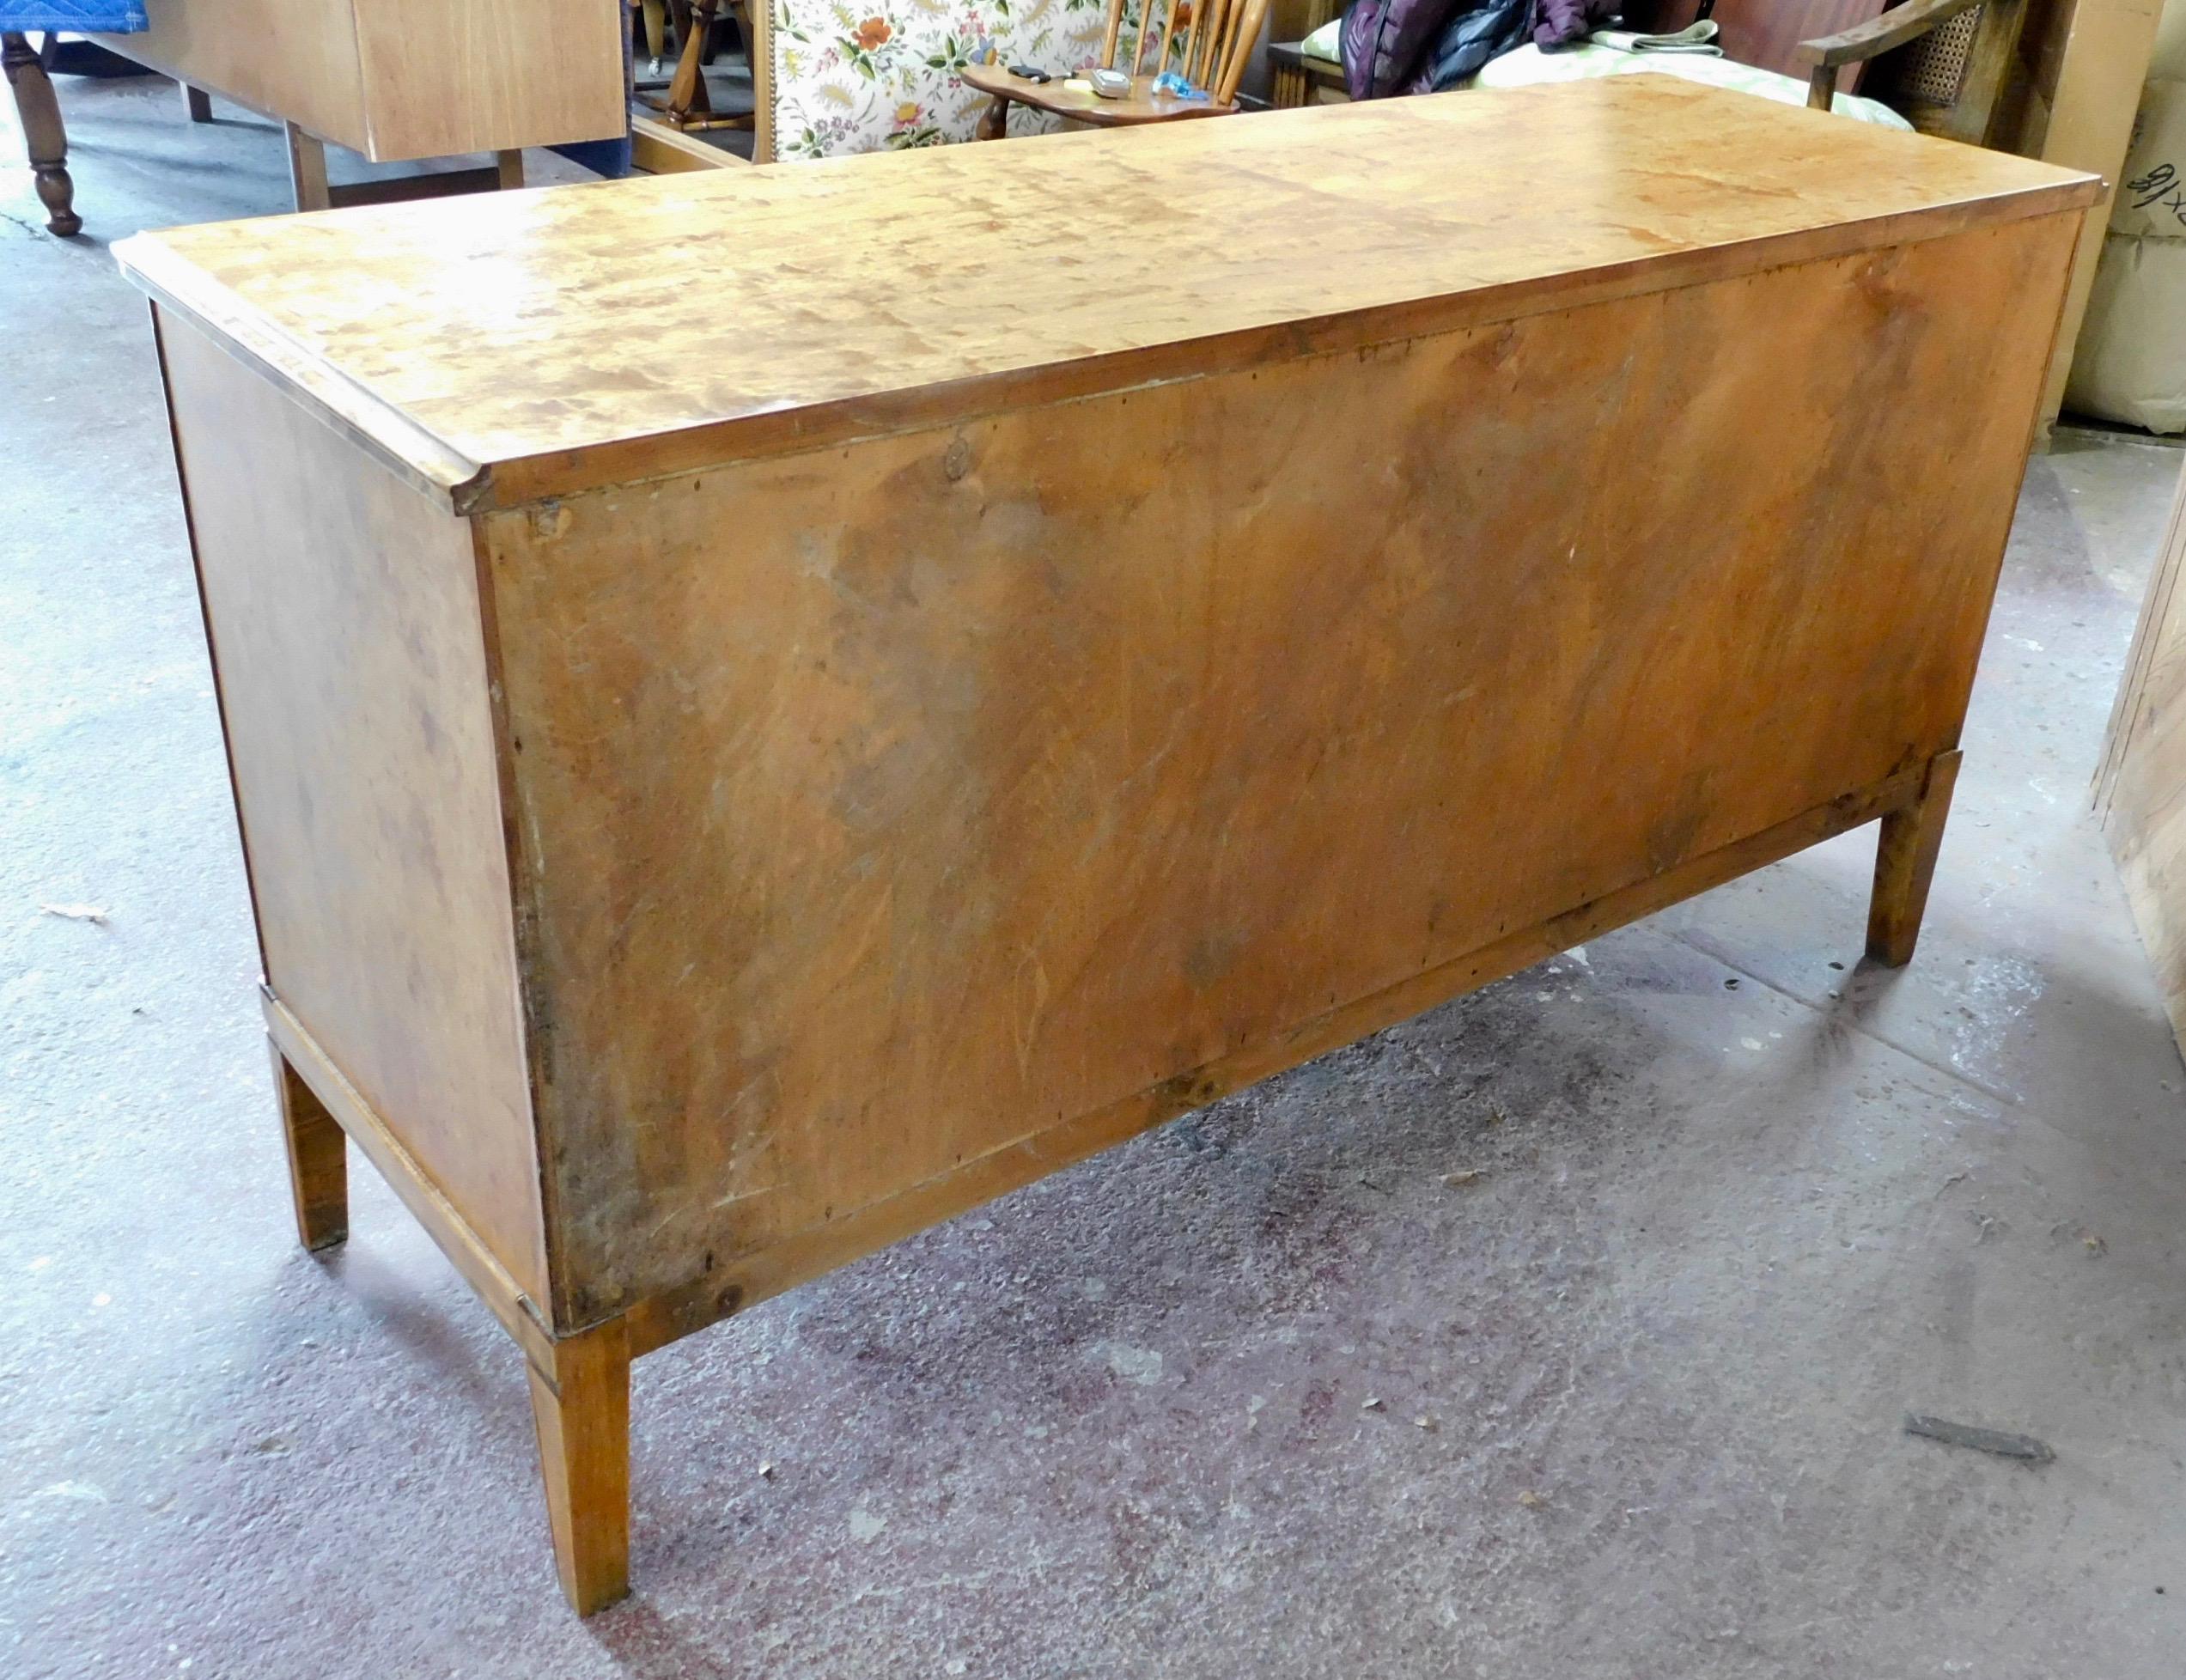 Swedish Art Deco Sideboard Cabinet in Golden Birch with Rosewood Inlay, 1930s For Sale 3